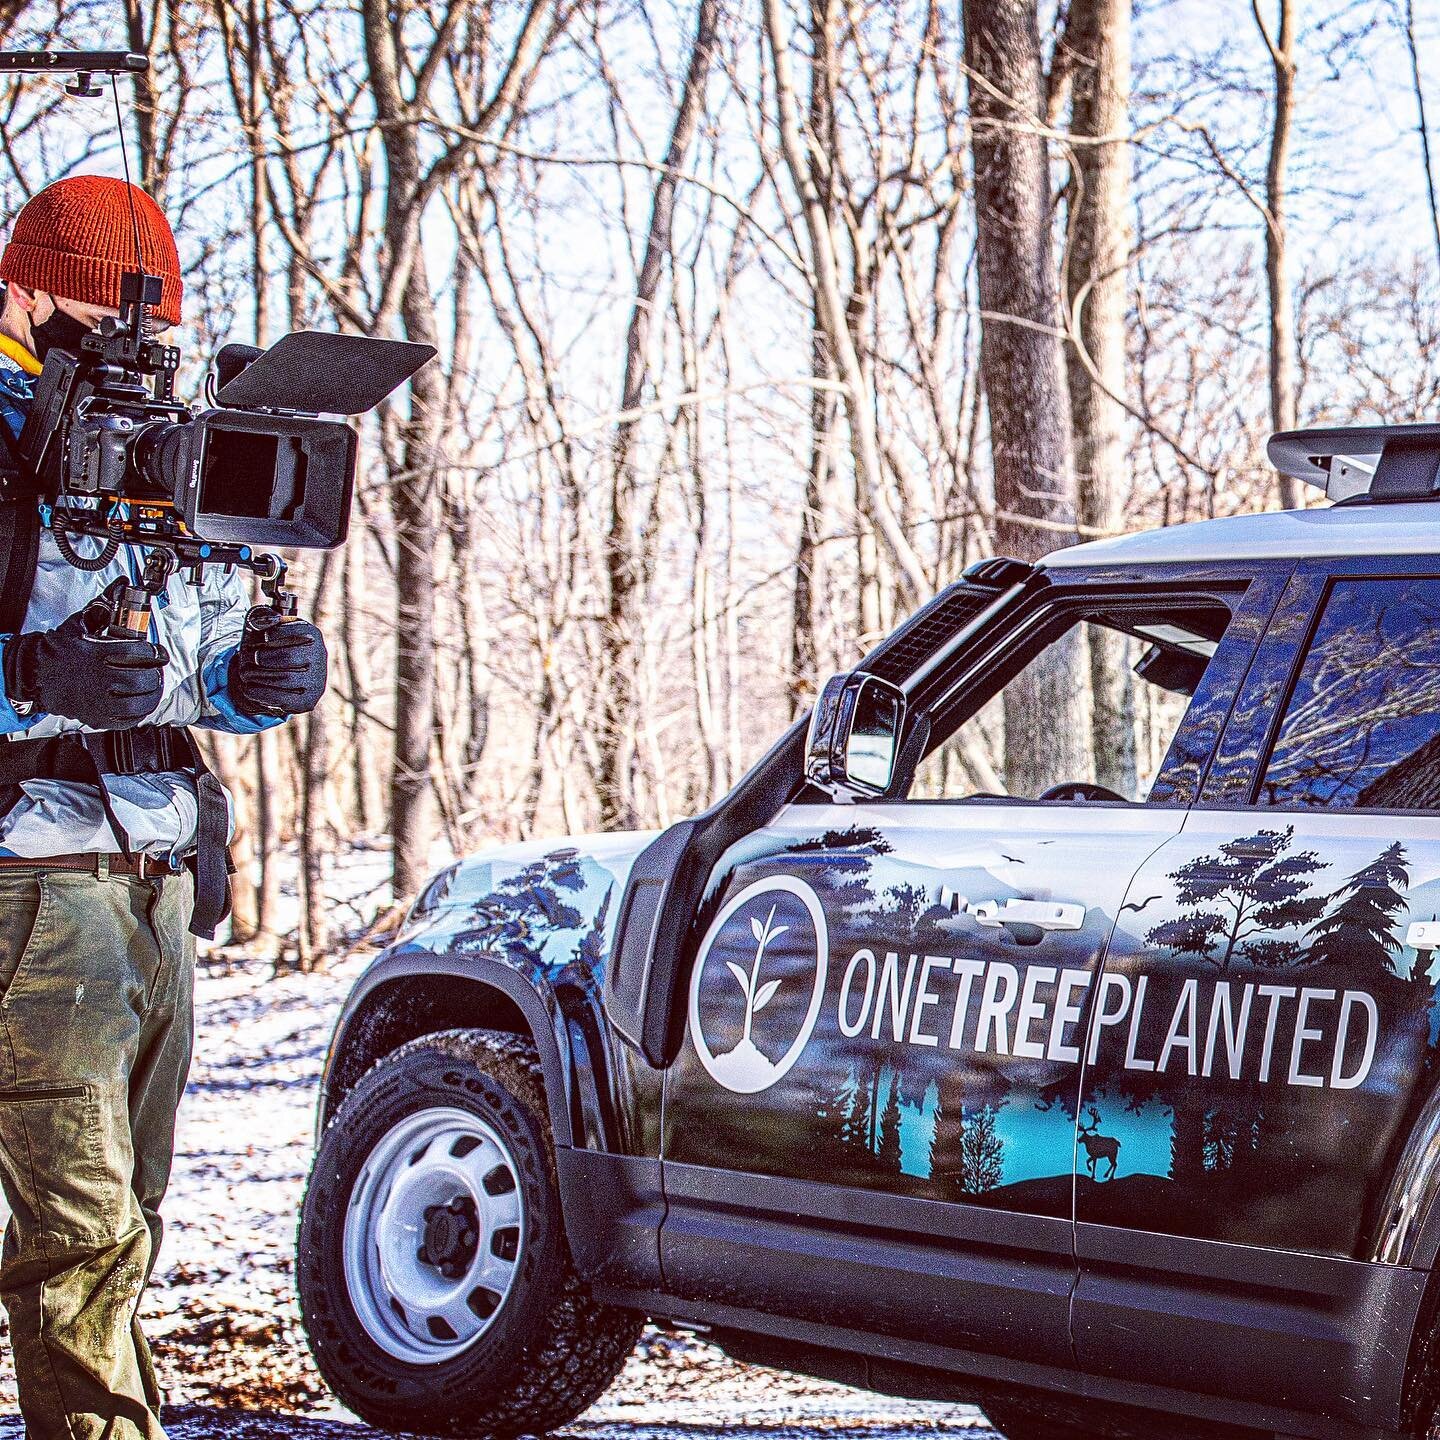 #behindthescenes with @landroverusa &hellip; @skylorejarvis making it look easy in 17* weather. #onetreeplanted #defenderaboveandbeyond